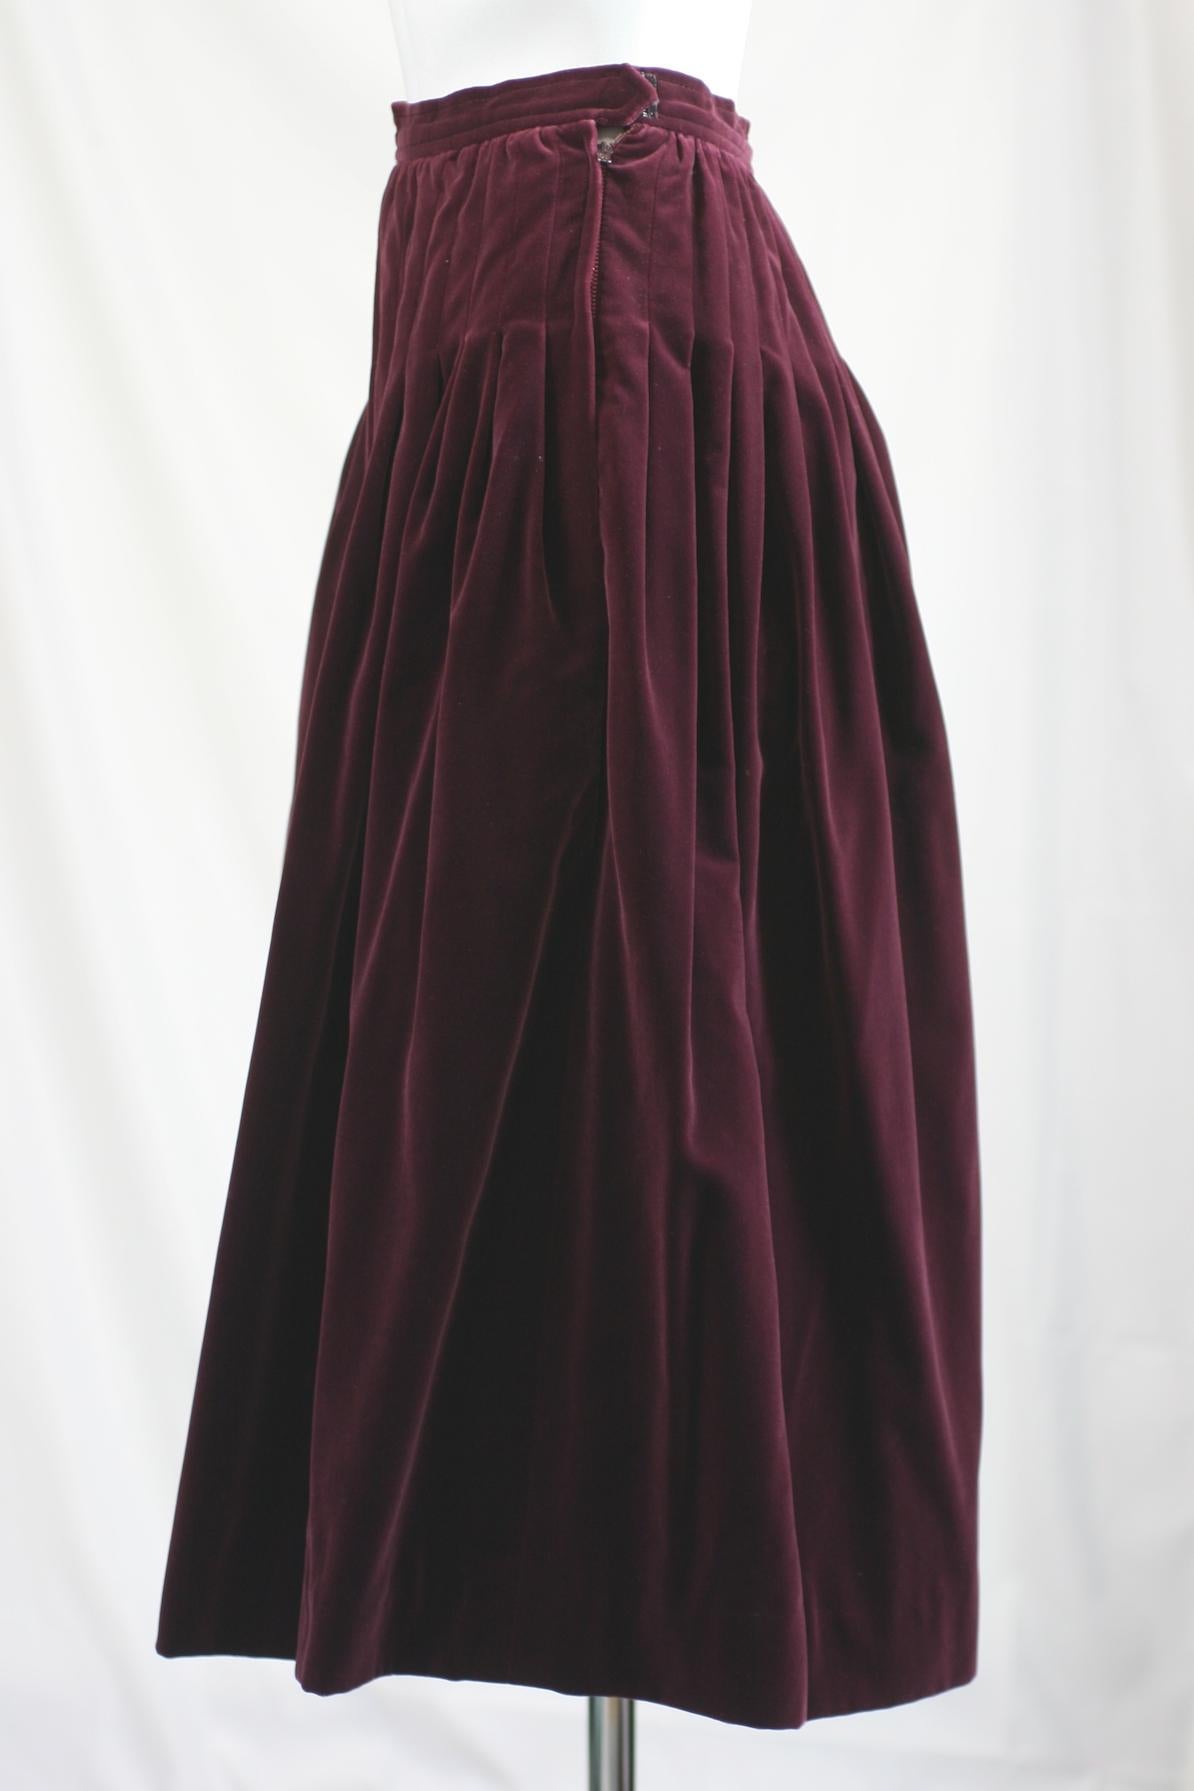 Yves Saint Laurent Russian Collection Pin tucked Wine Velvet skirt. Lays flat across hips and releases to fullness below. Color is off on images. The rich wine color is closest in label image. Size 34 France, 70% cotton 30% rayon. 
Waist 22